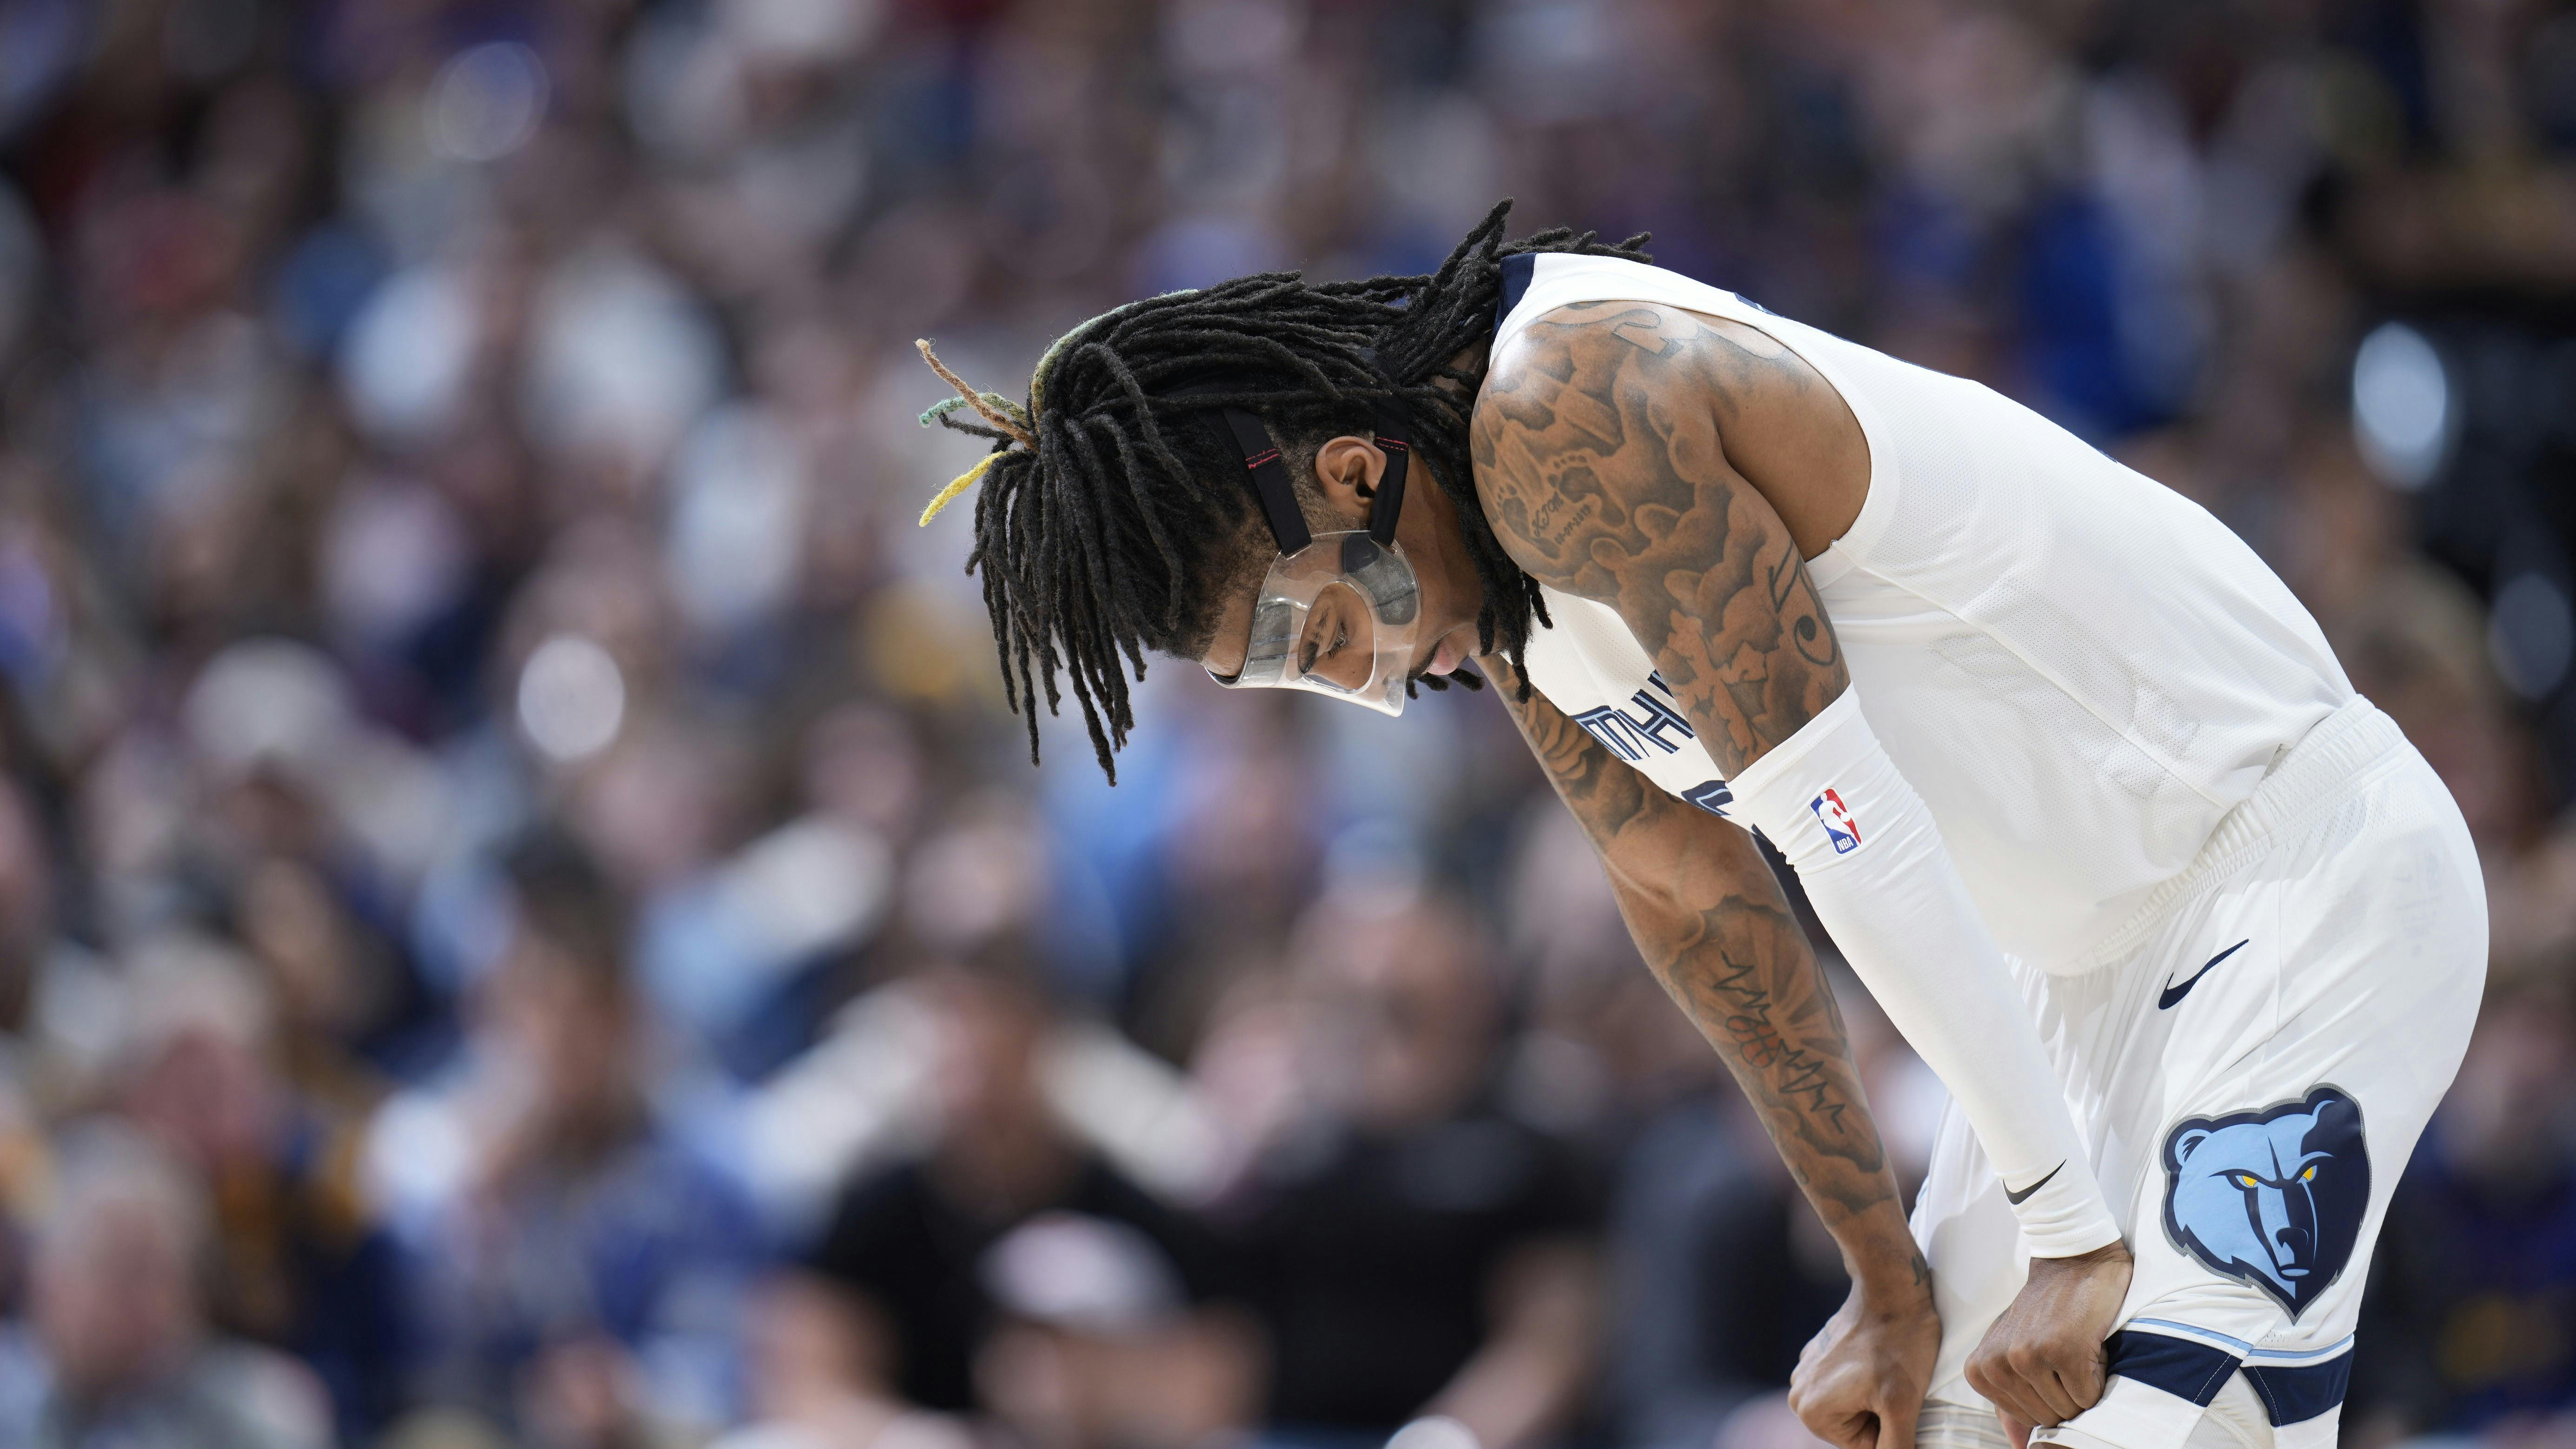 Ja Morant adds to list of young NBA stars who jeopardized careers with terrible decisions